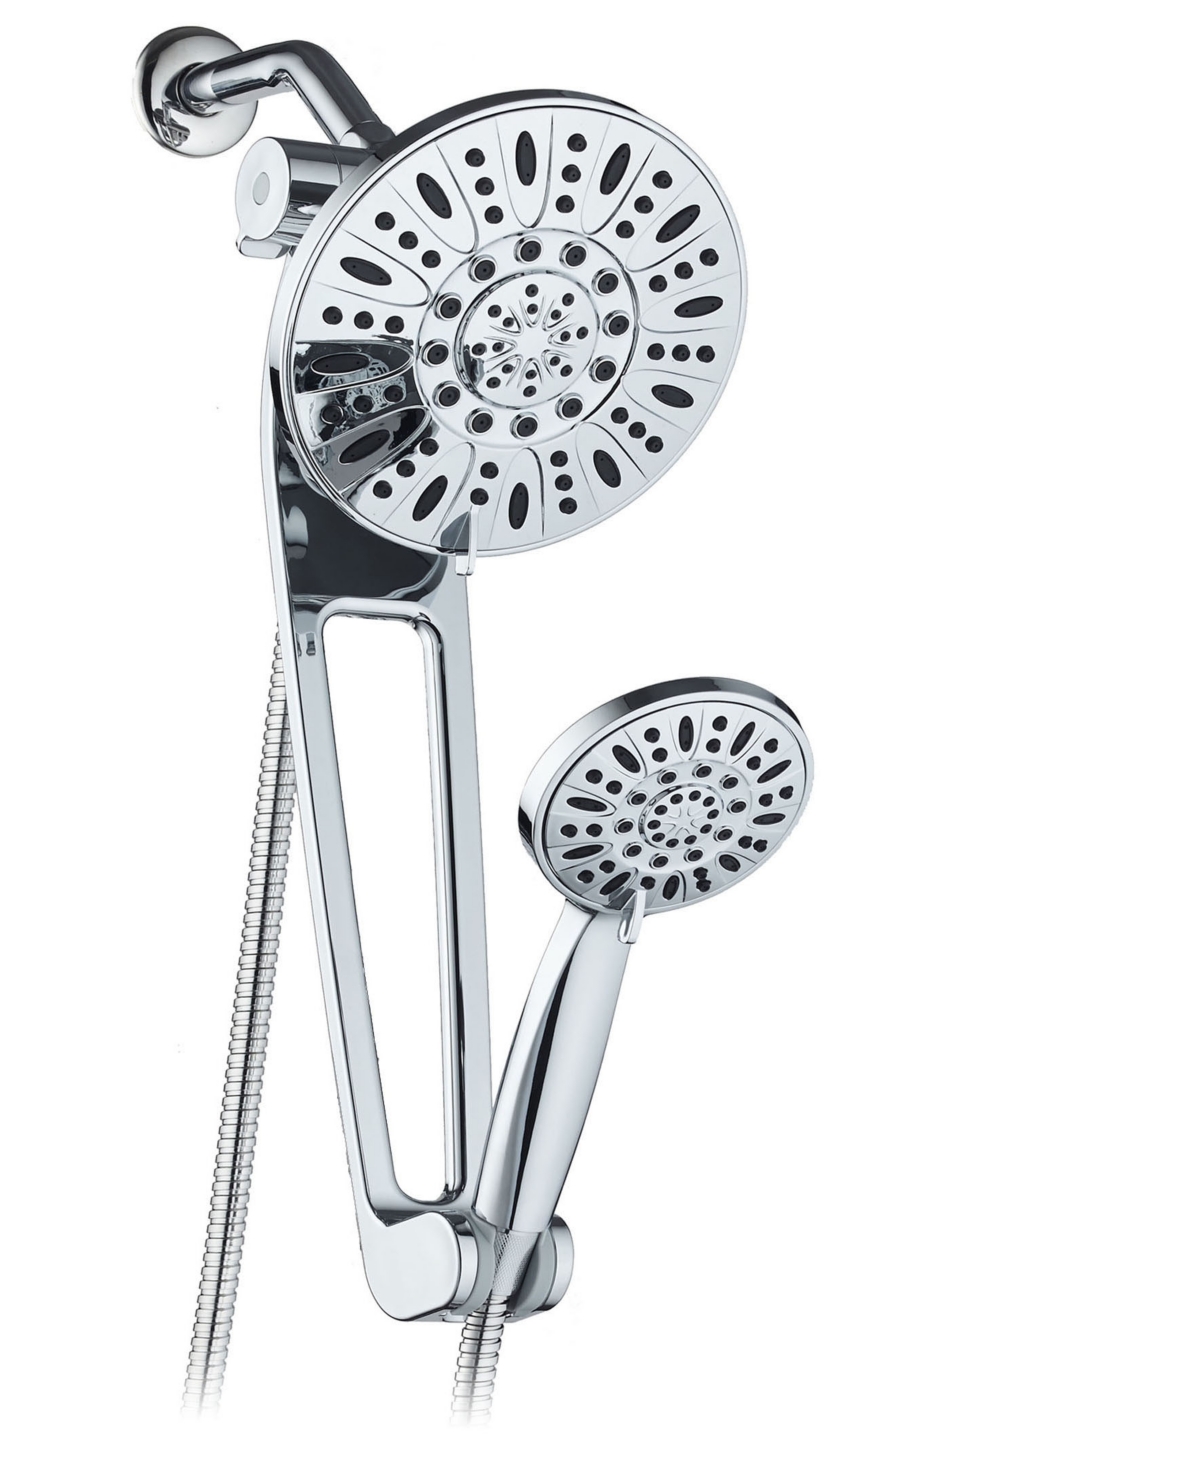 Aquabar High-Pressure 48-mode Shower Spa Combo with Adjustable 18-in Extension Arm - Chrome